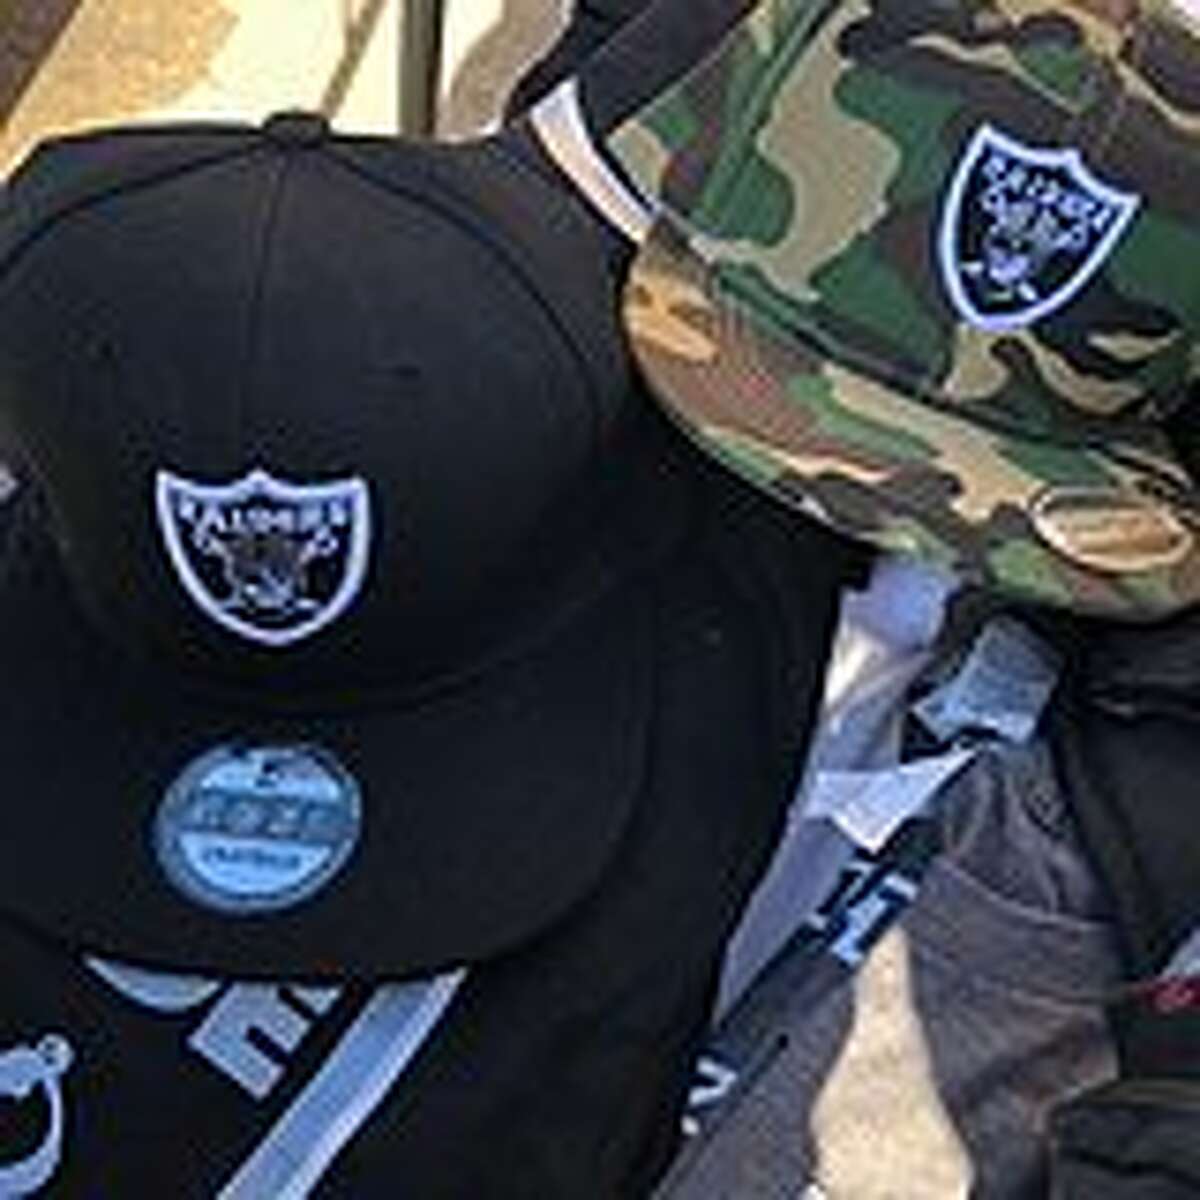 ICE conducts raid at Oakland Raiders game on unlicensed NFL apparel